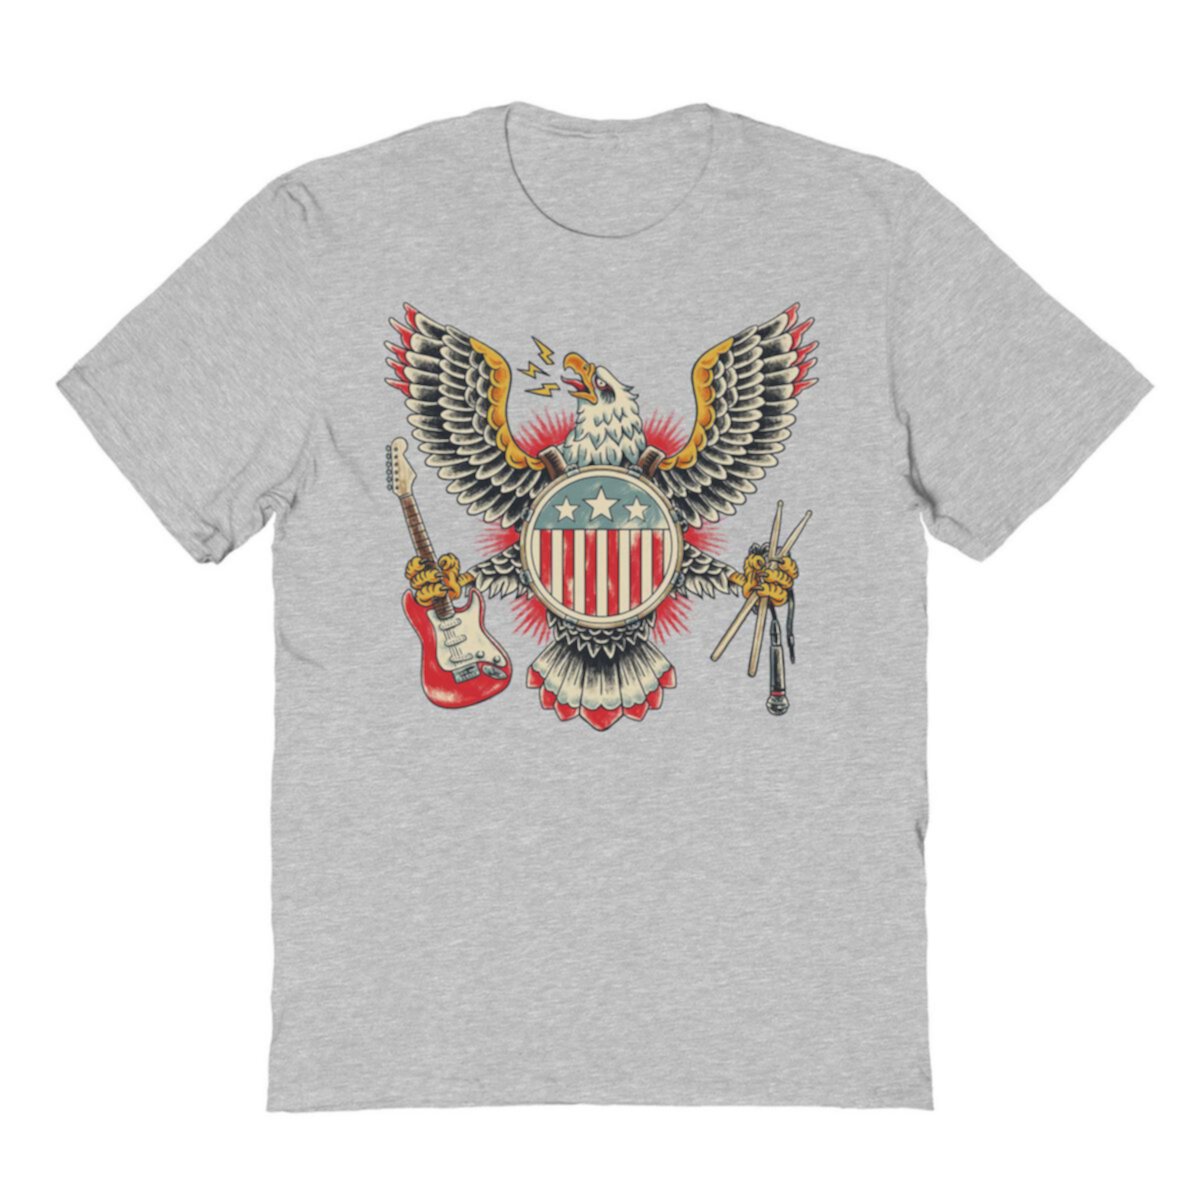 Men's COLAB89 by Threadless American Rockstar Graphic Tee COLAB89 by Threadless